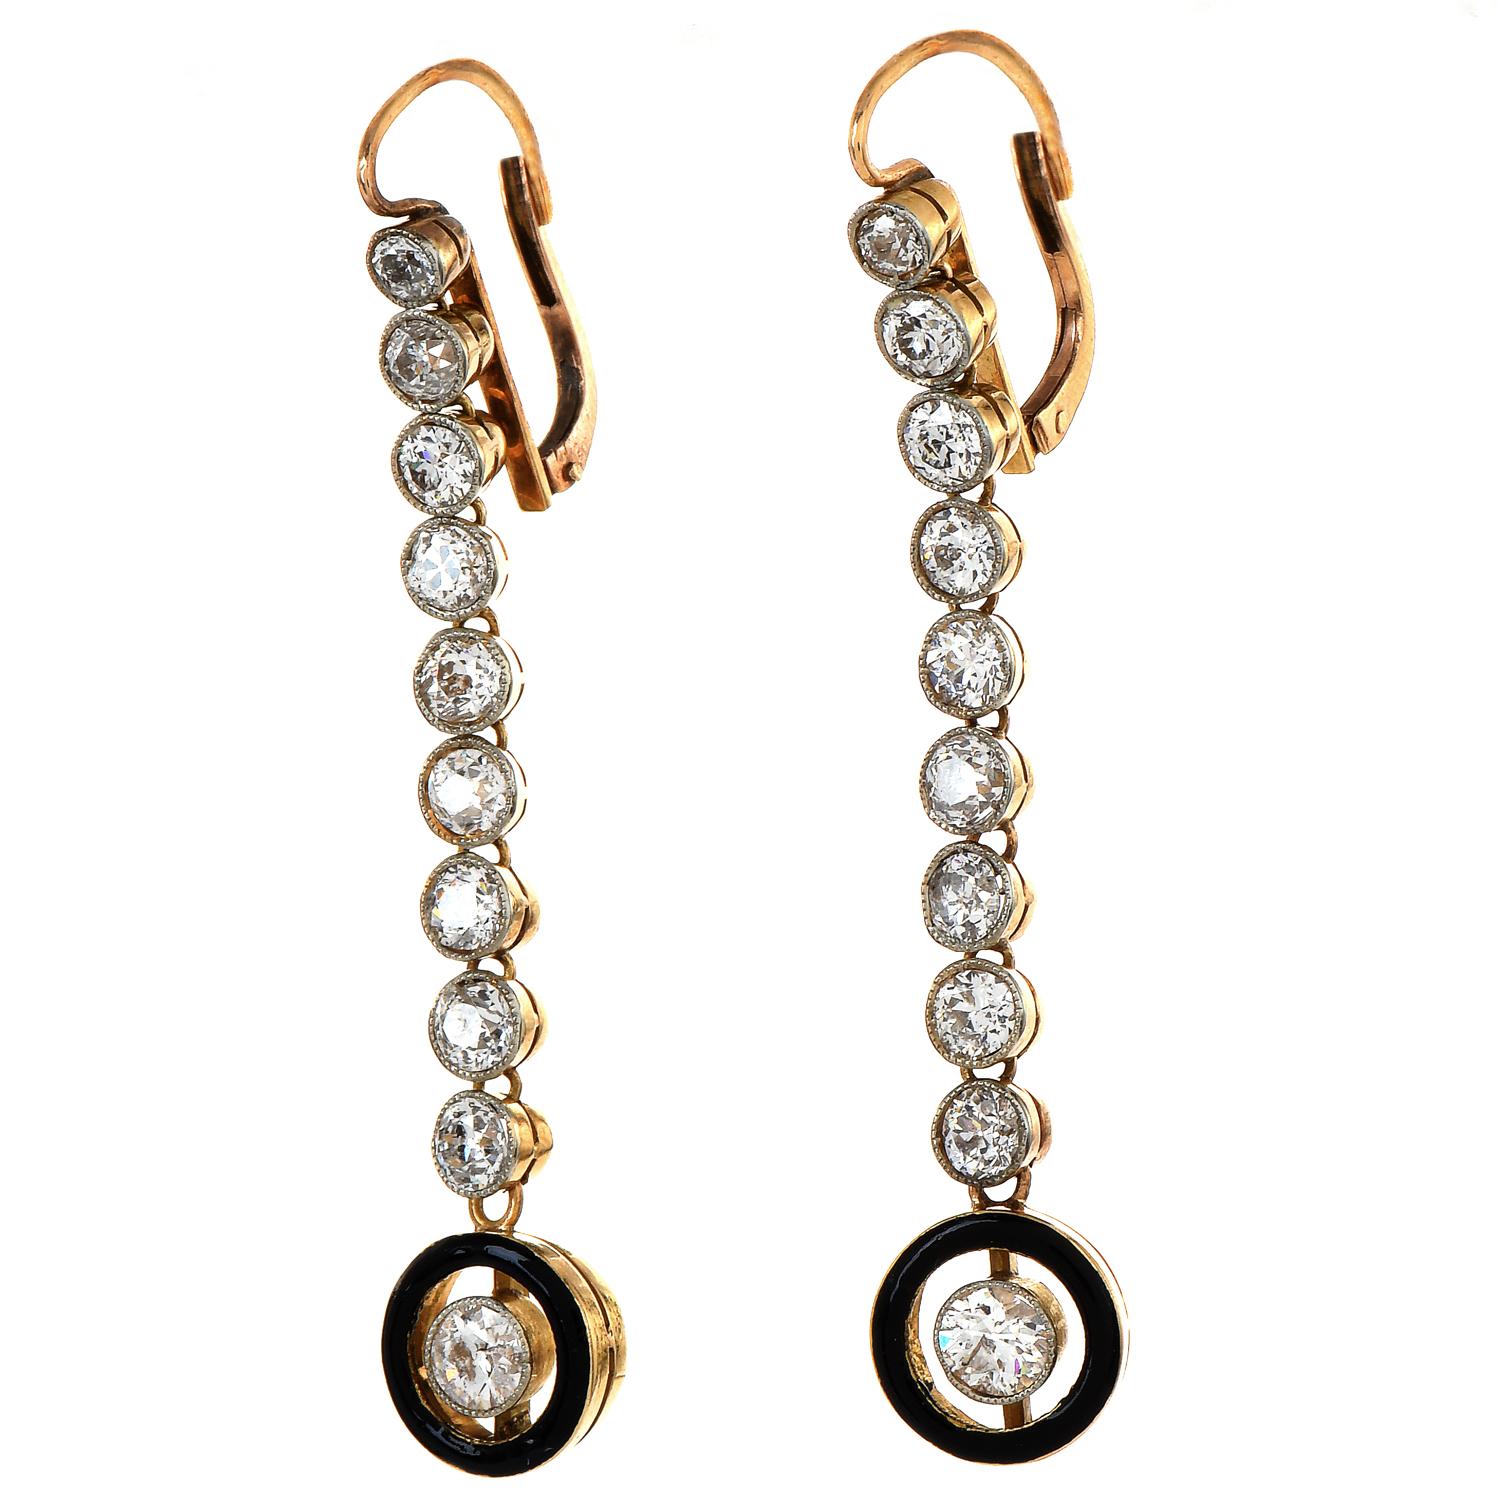  These fine elongated timeless earrings are elegant at every turn.

These vintage retro dangle drops  Black enamle  earrings are Crafted in 18K yellow gold. 

The center of each drop contains an old European cut diamond bezel set & is topped by (18)